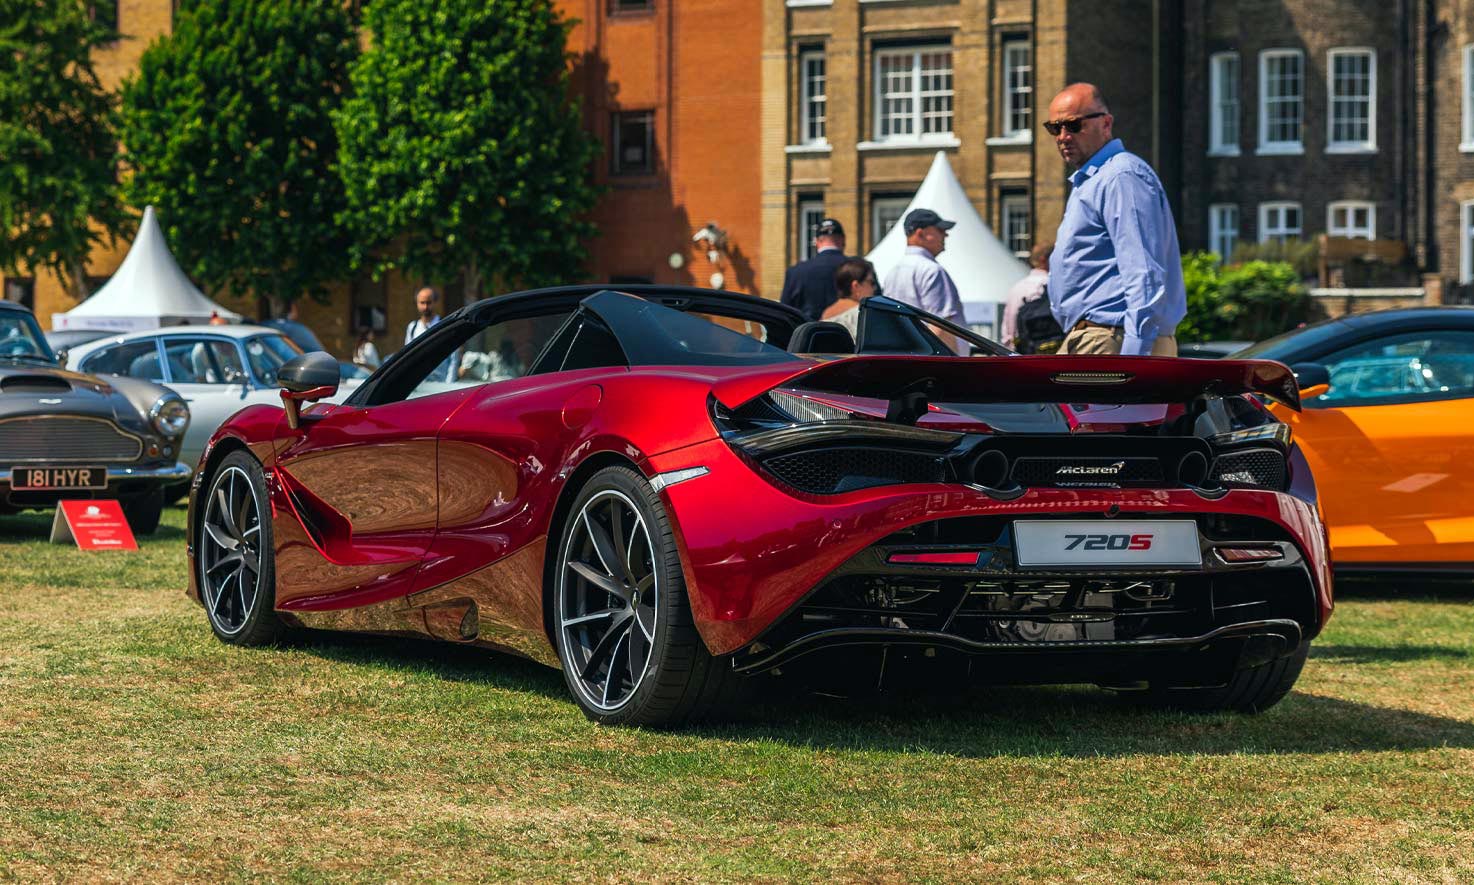 McLaren 720S at Supercar Day London Concours